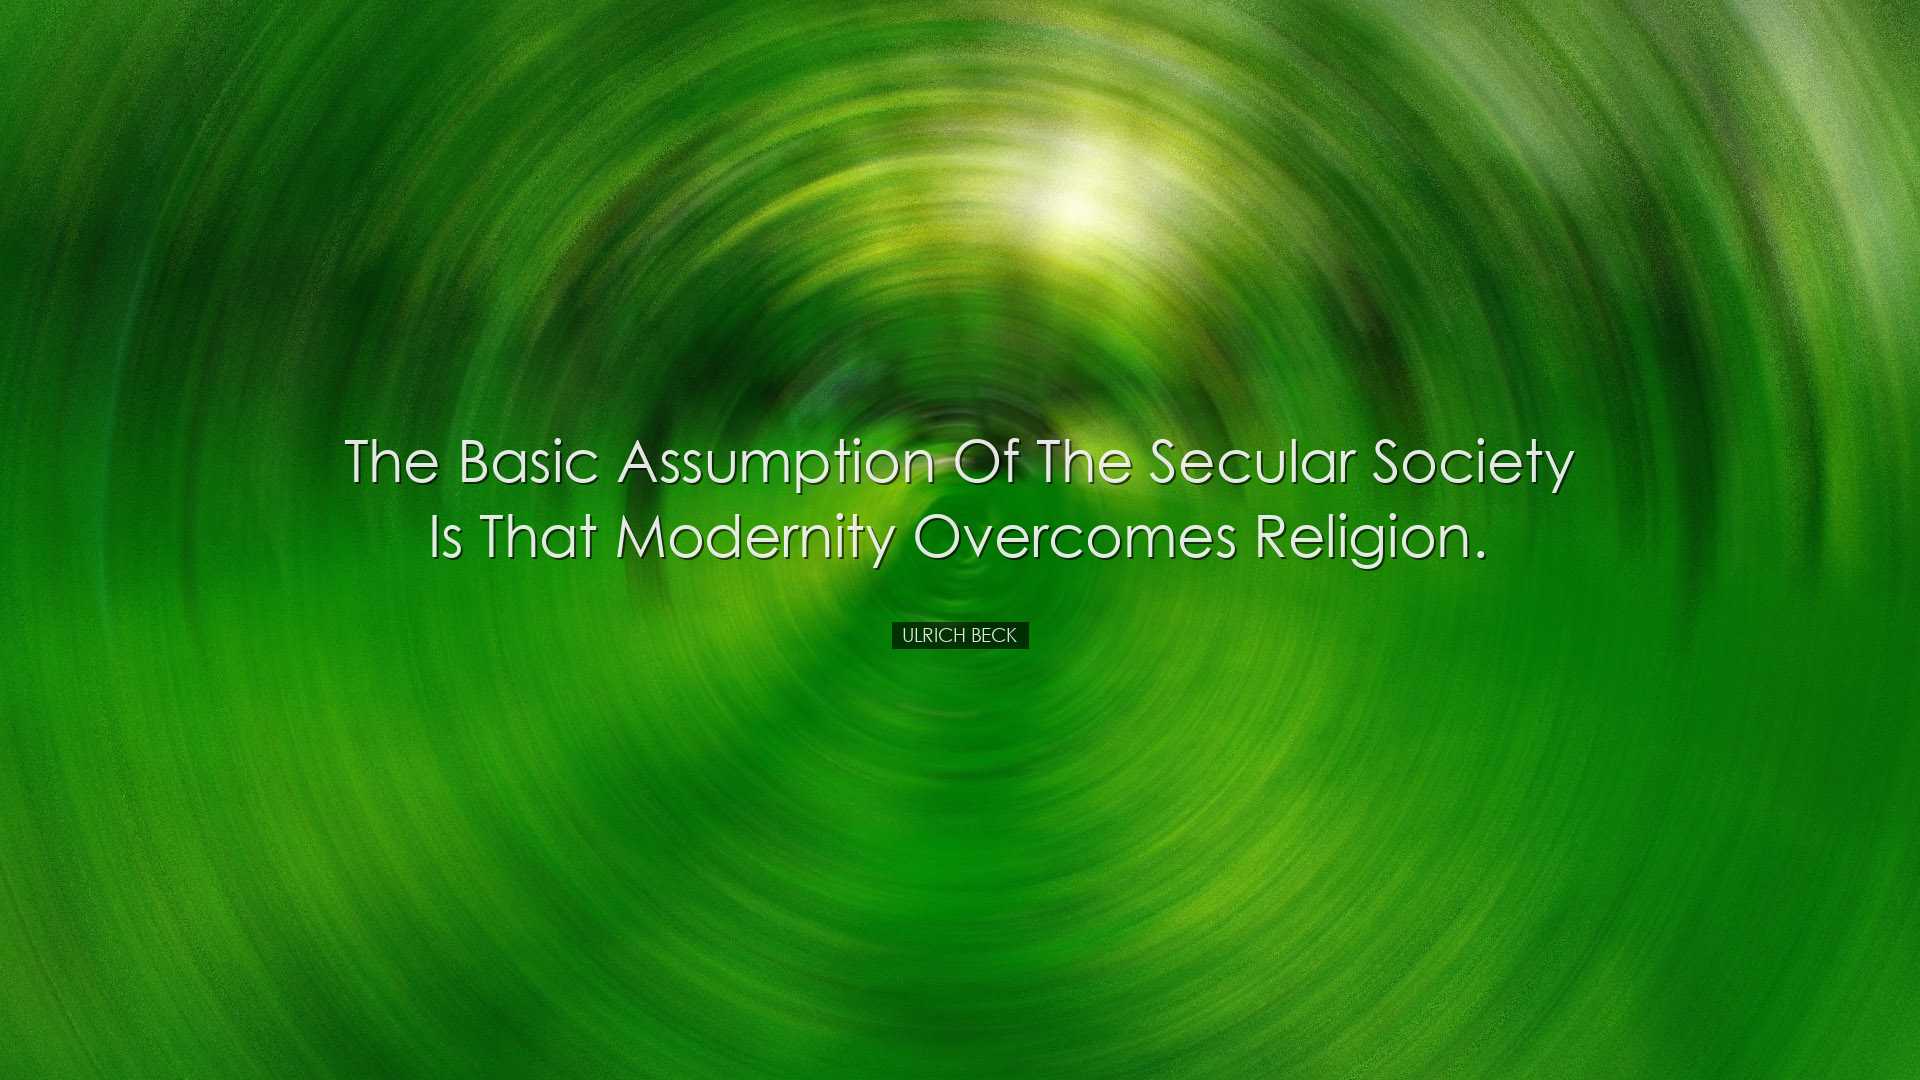 The basic assumption of the secular society is that modernity over